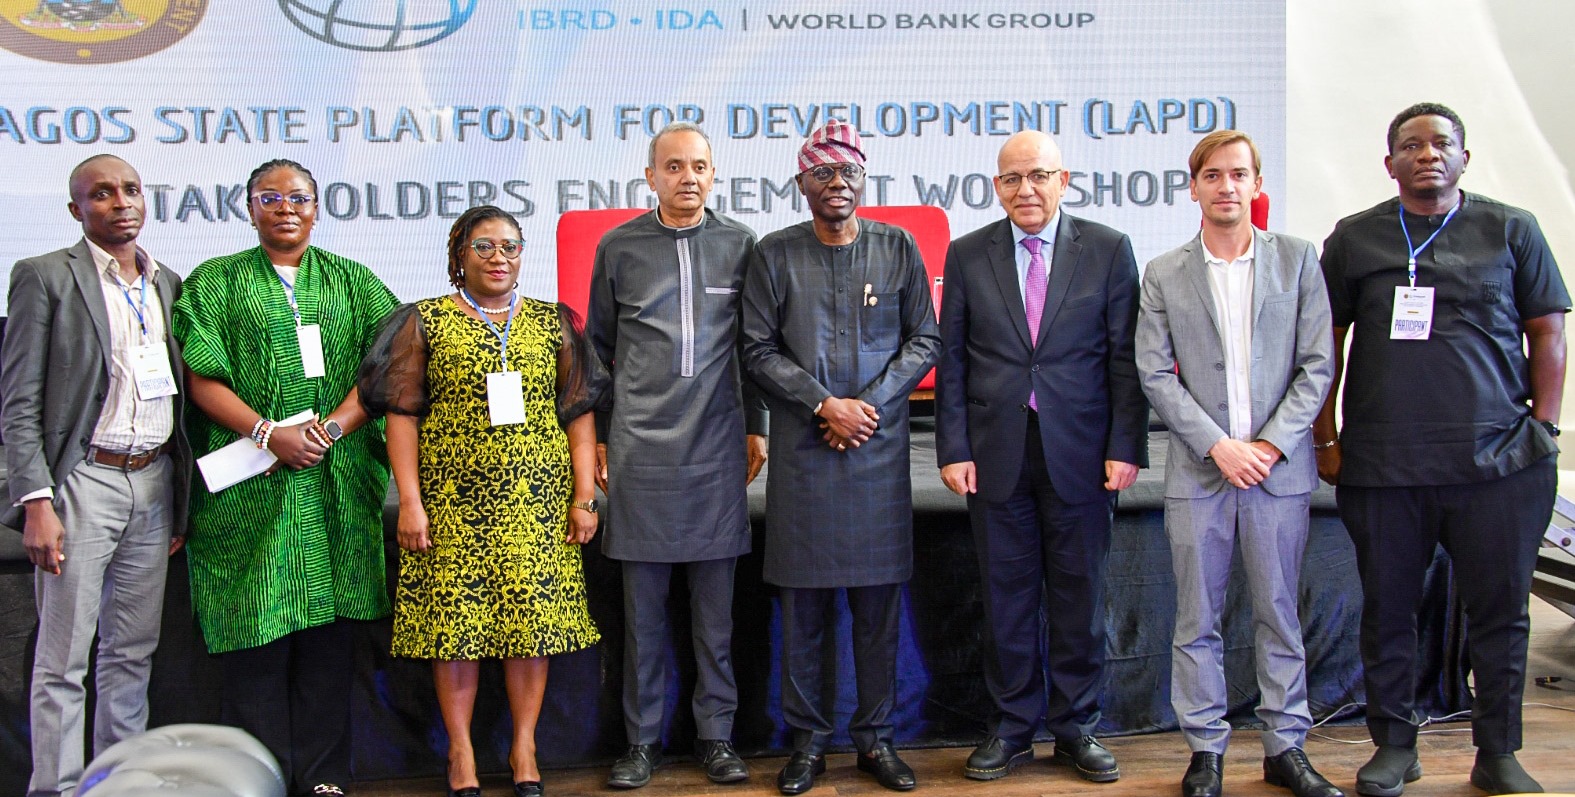 Photos: Gov Sanwo-Olu Attends World Bank Workshop At The Lagos Continental Hotel, V.I On Tuesday